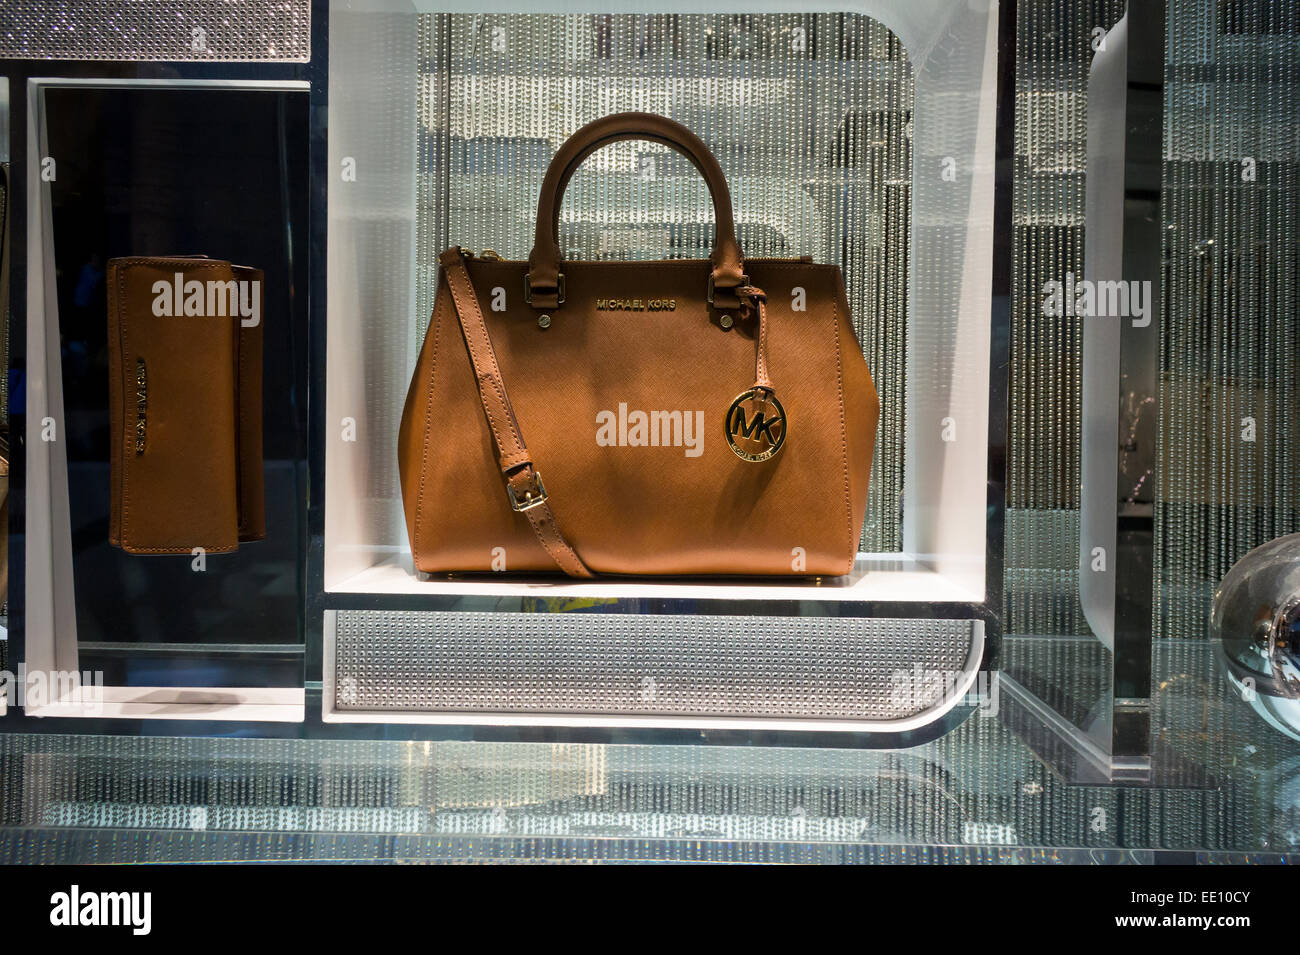 A Michael Kors bag in the window of the brand's store in the Time ...